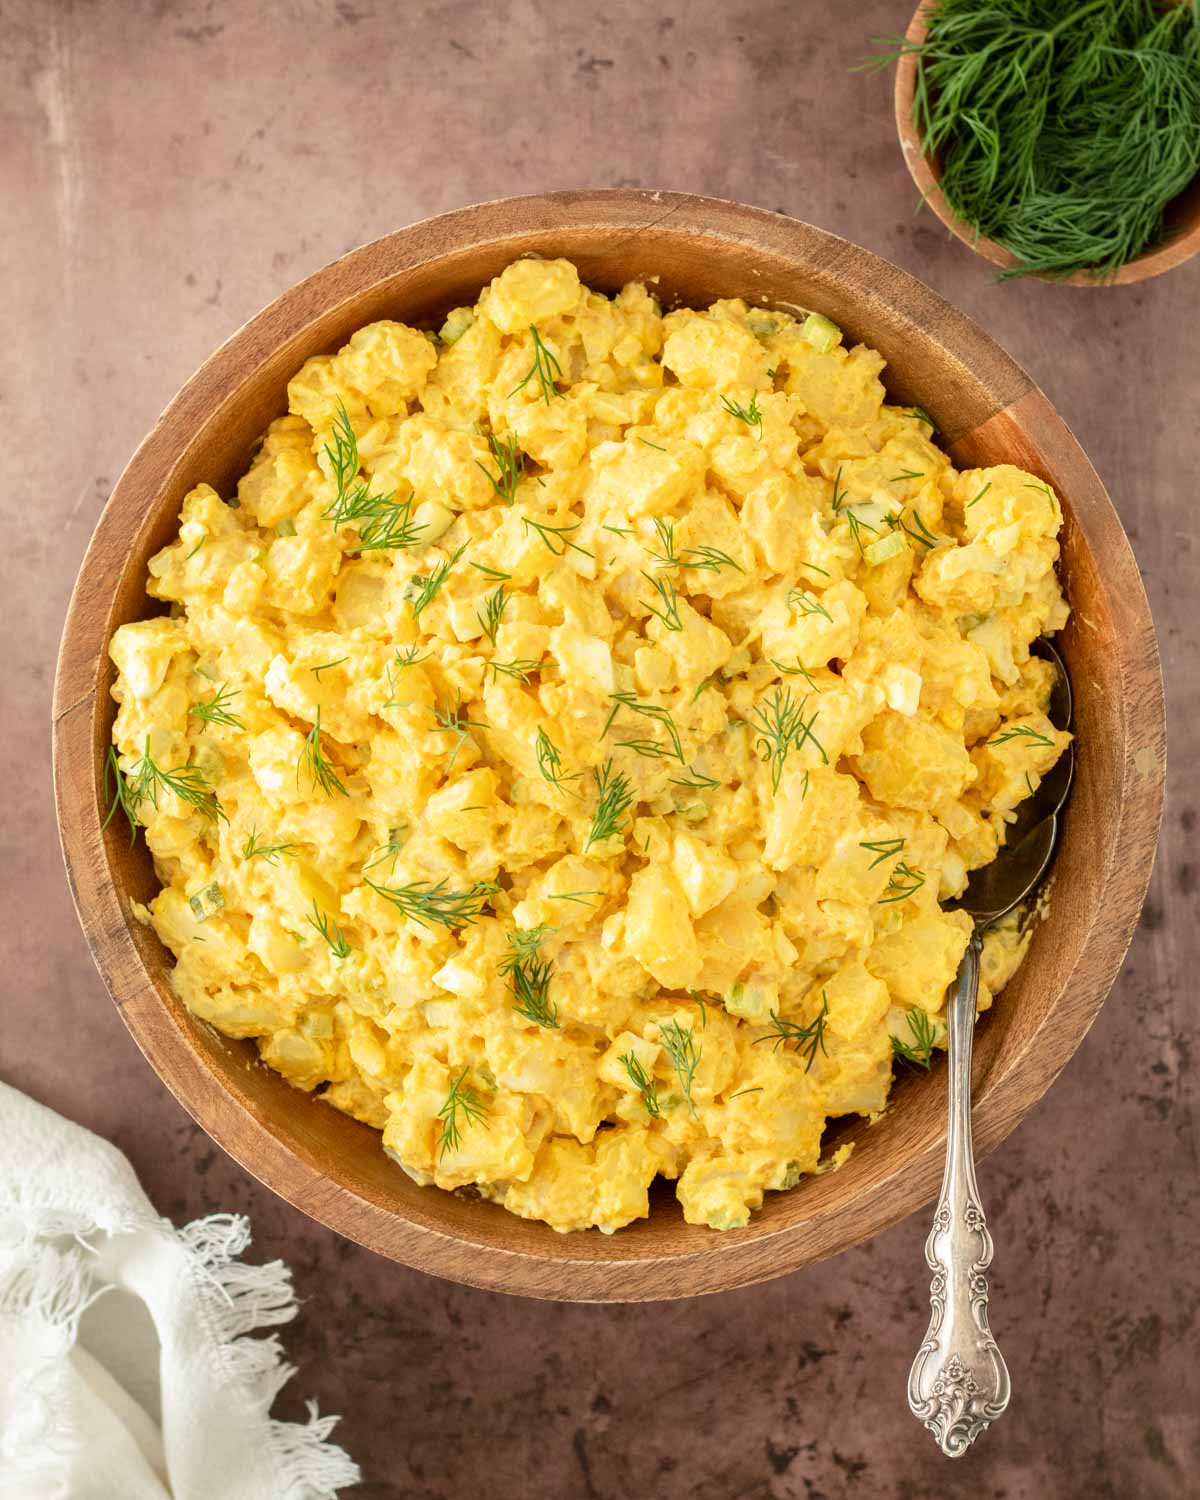 This classic mustard potato salad is the perfect summer side dish made with healthy, filling ingredients with classic potato salad flavors. Serve this easy potato salad at your next cookout or as a Fourth of July cookout side.